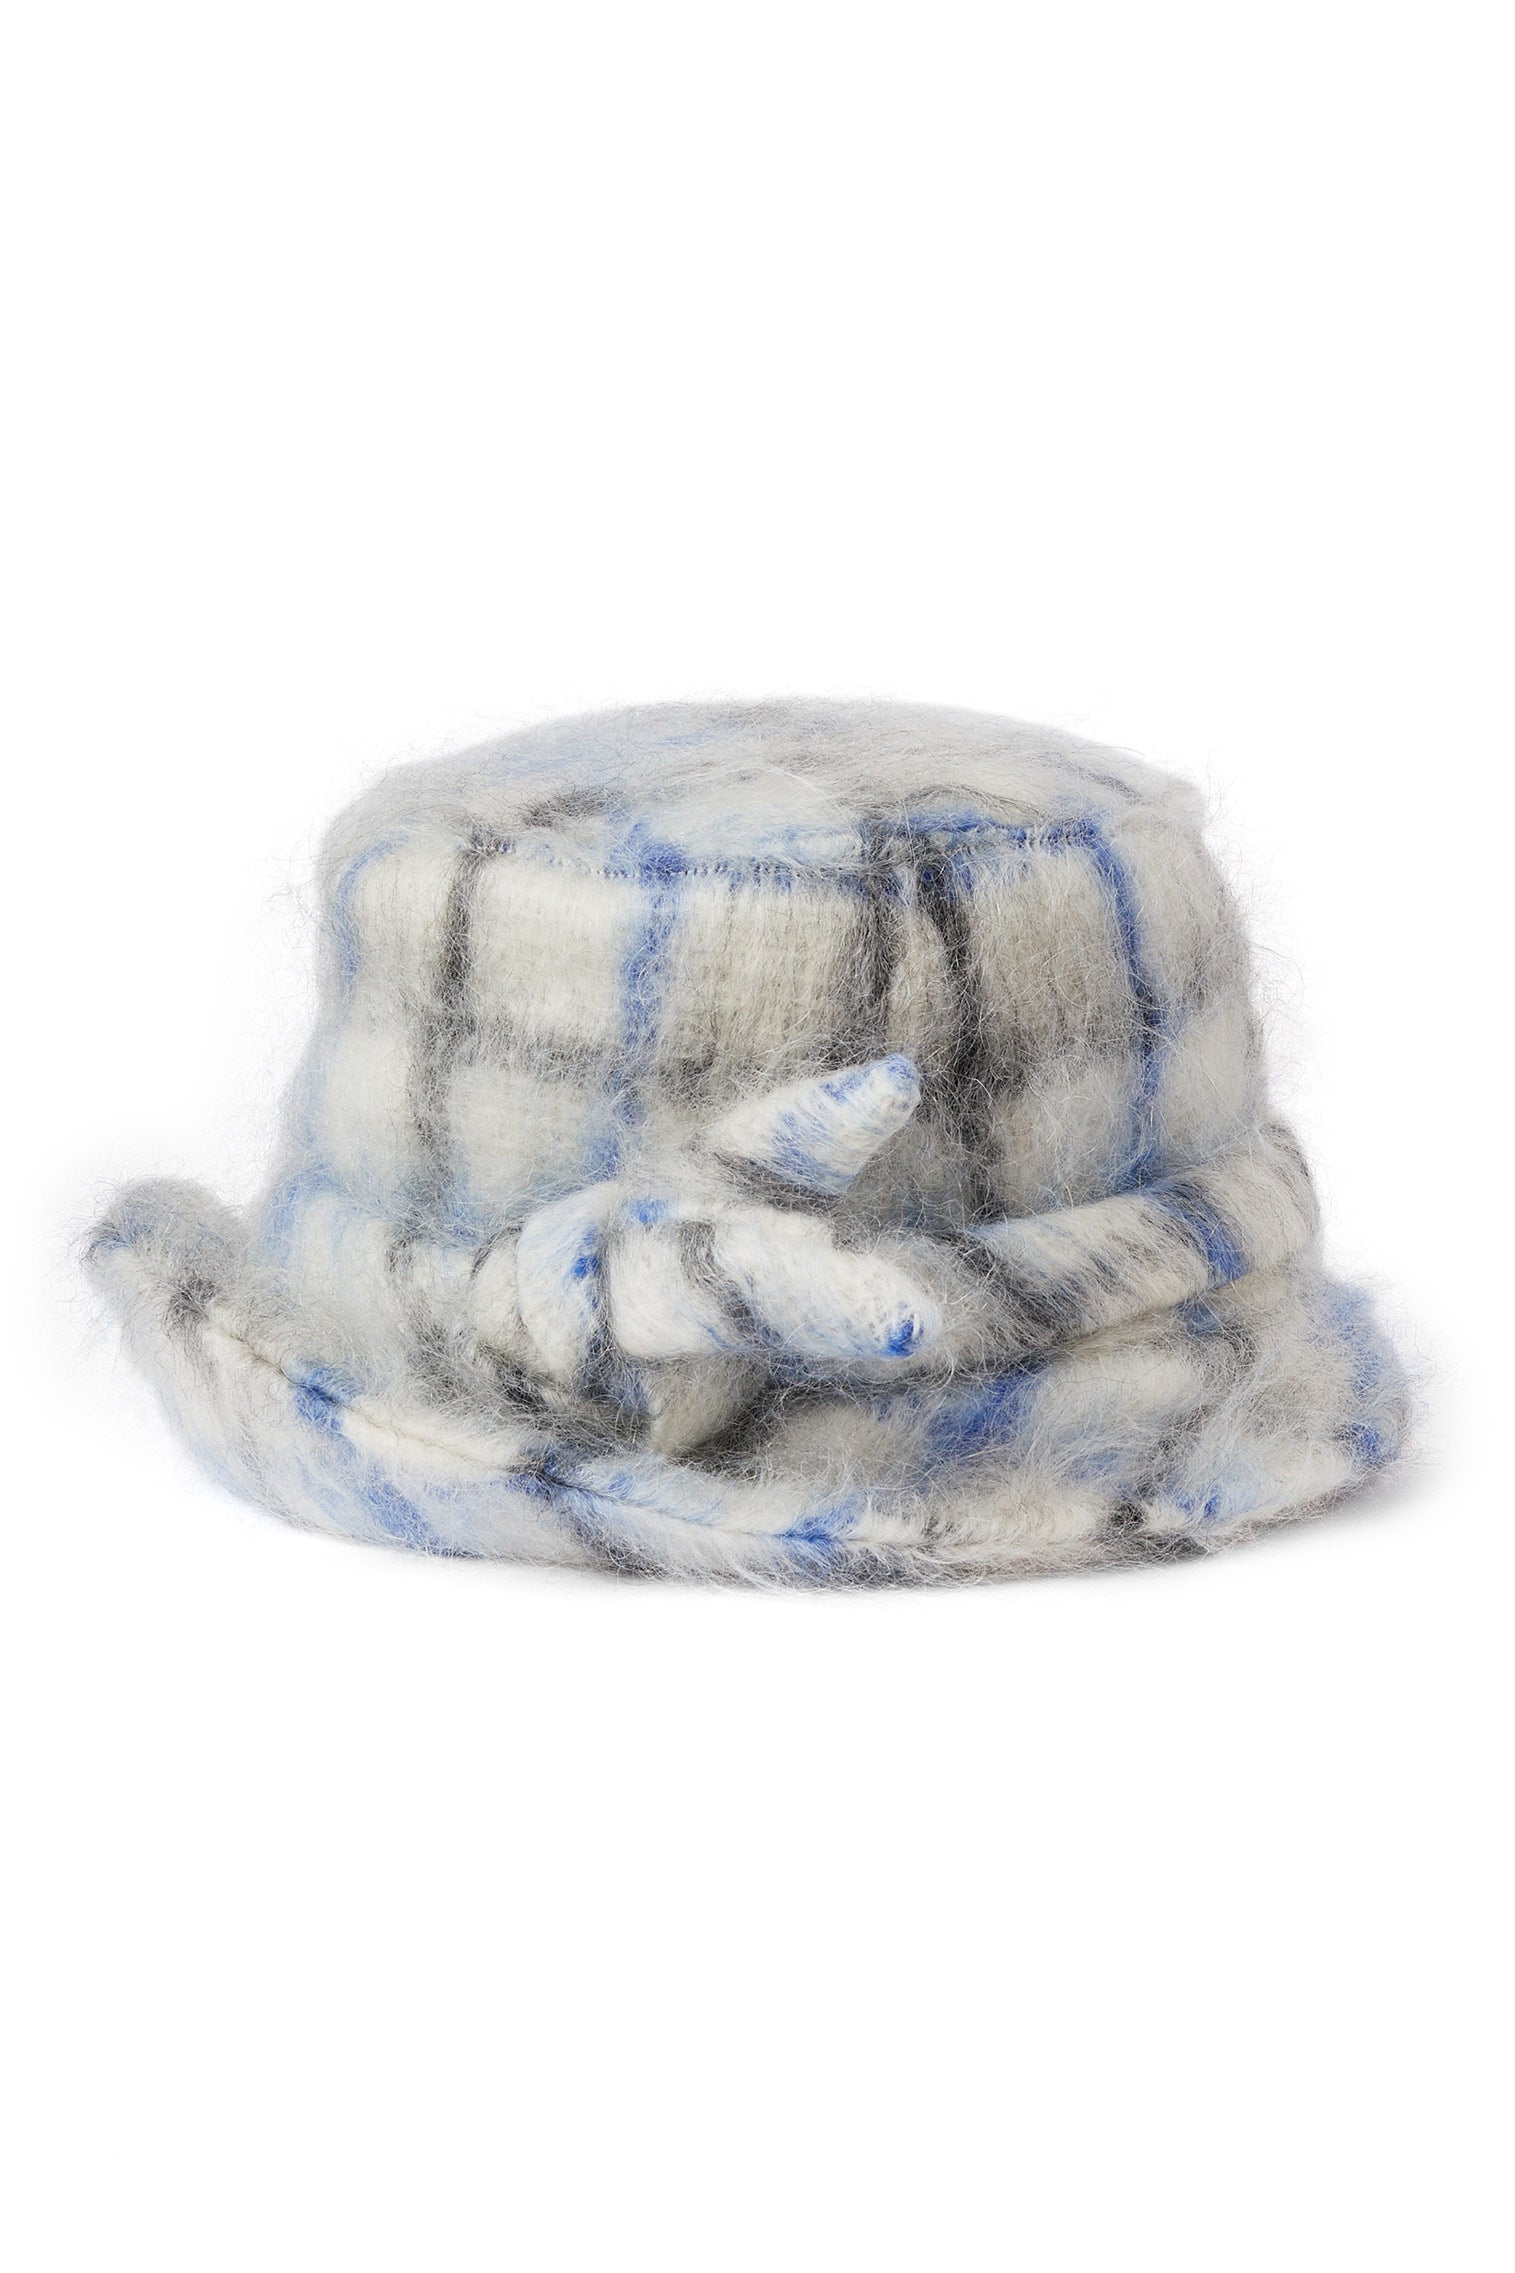 Dolores White Check Cloche - Lock & Co. Christmas Gift Edit - Lock & Co. Hatters London UK